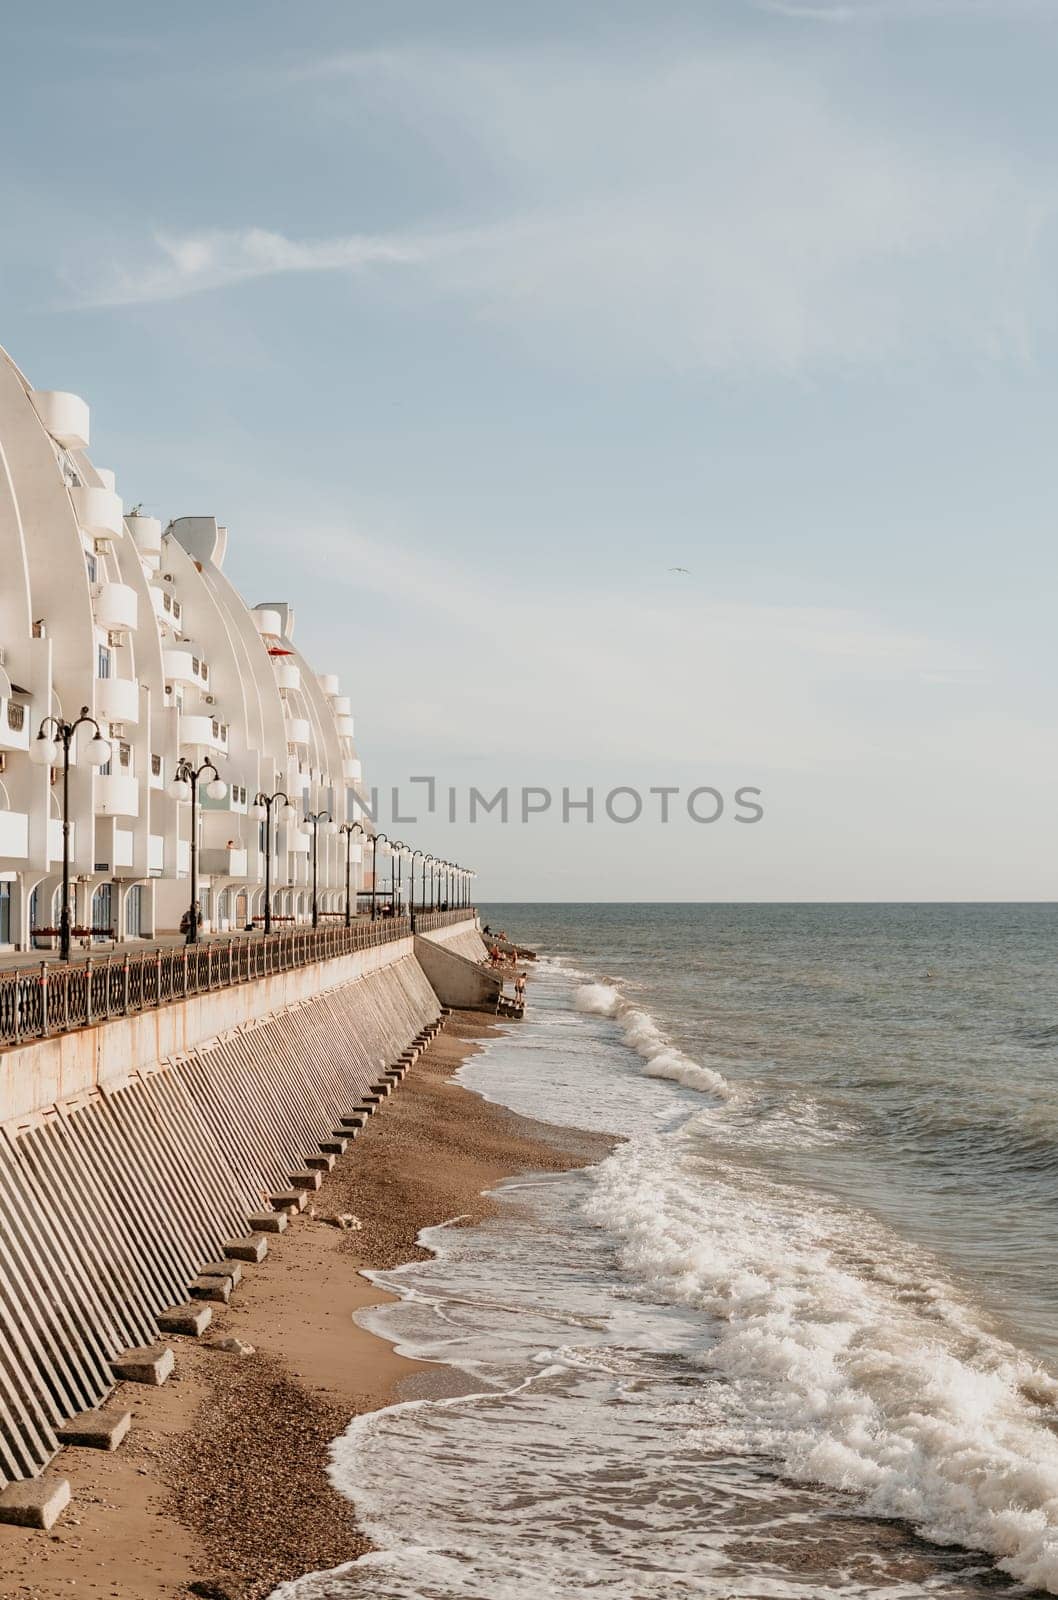 Coastal residential areas with a modern hotel and restaurant complex alongside sandy beaches. Summer holiday vacation and travel concept. by panophotograph